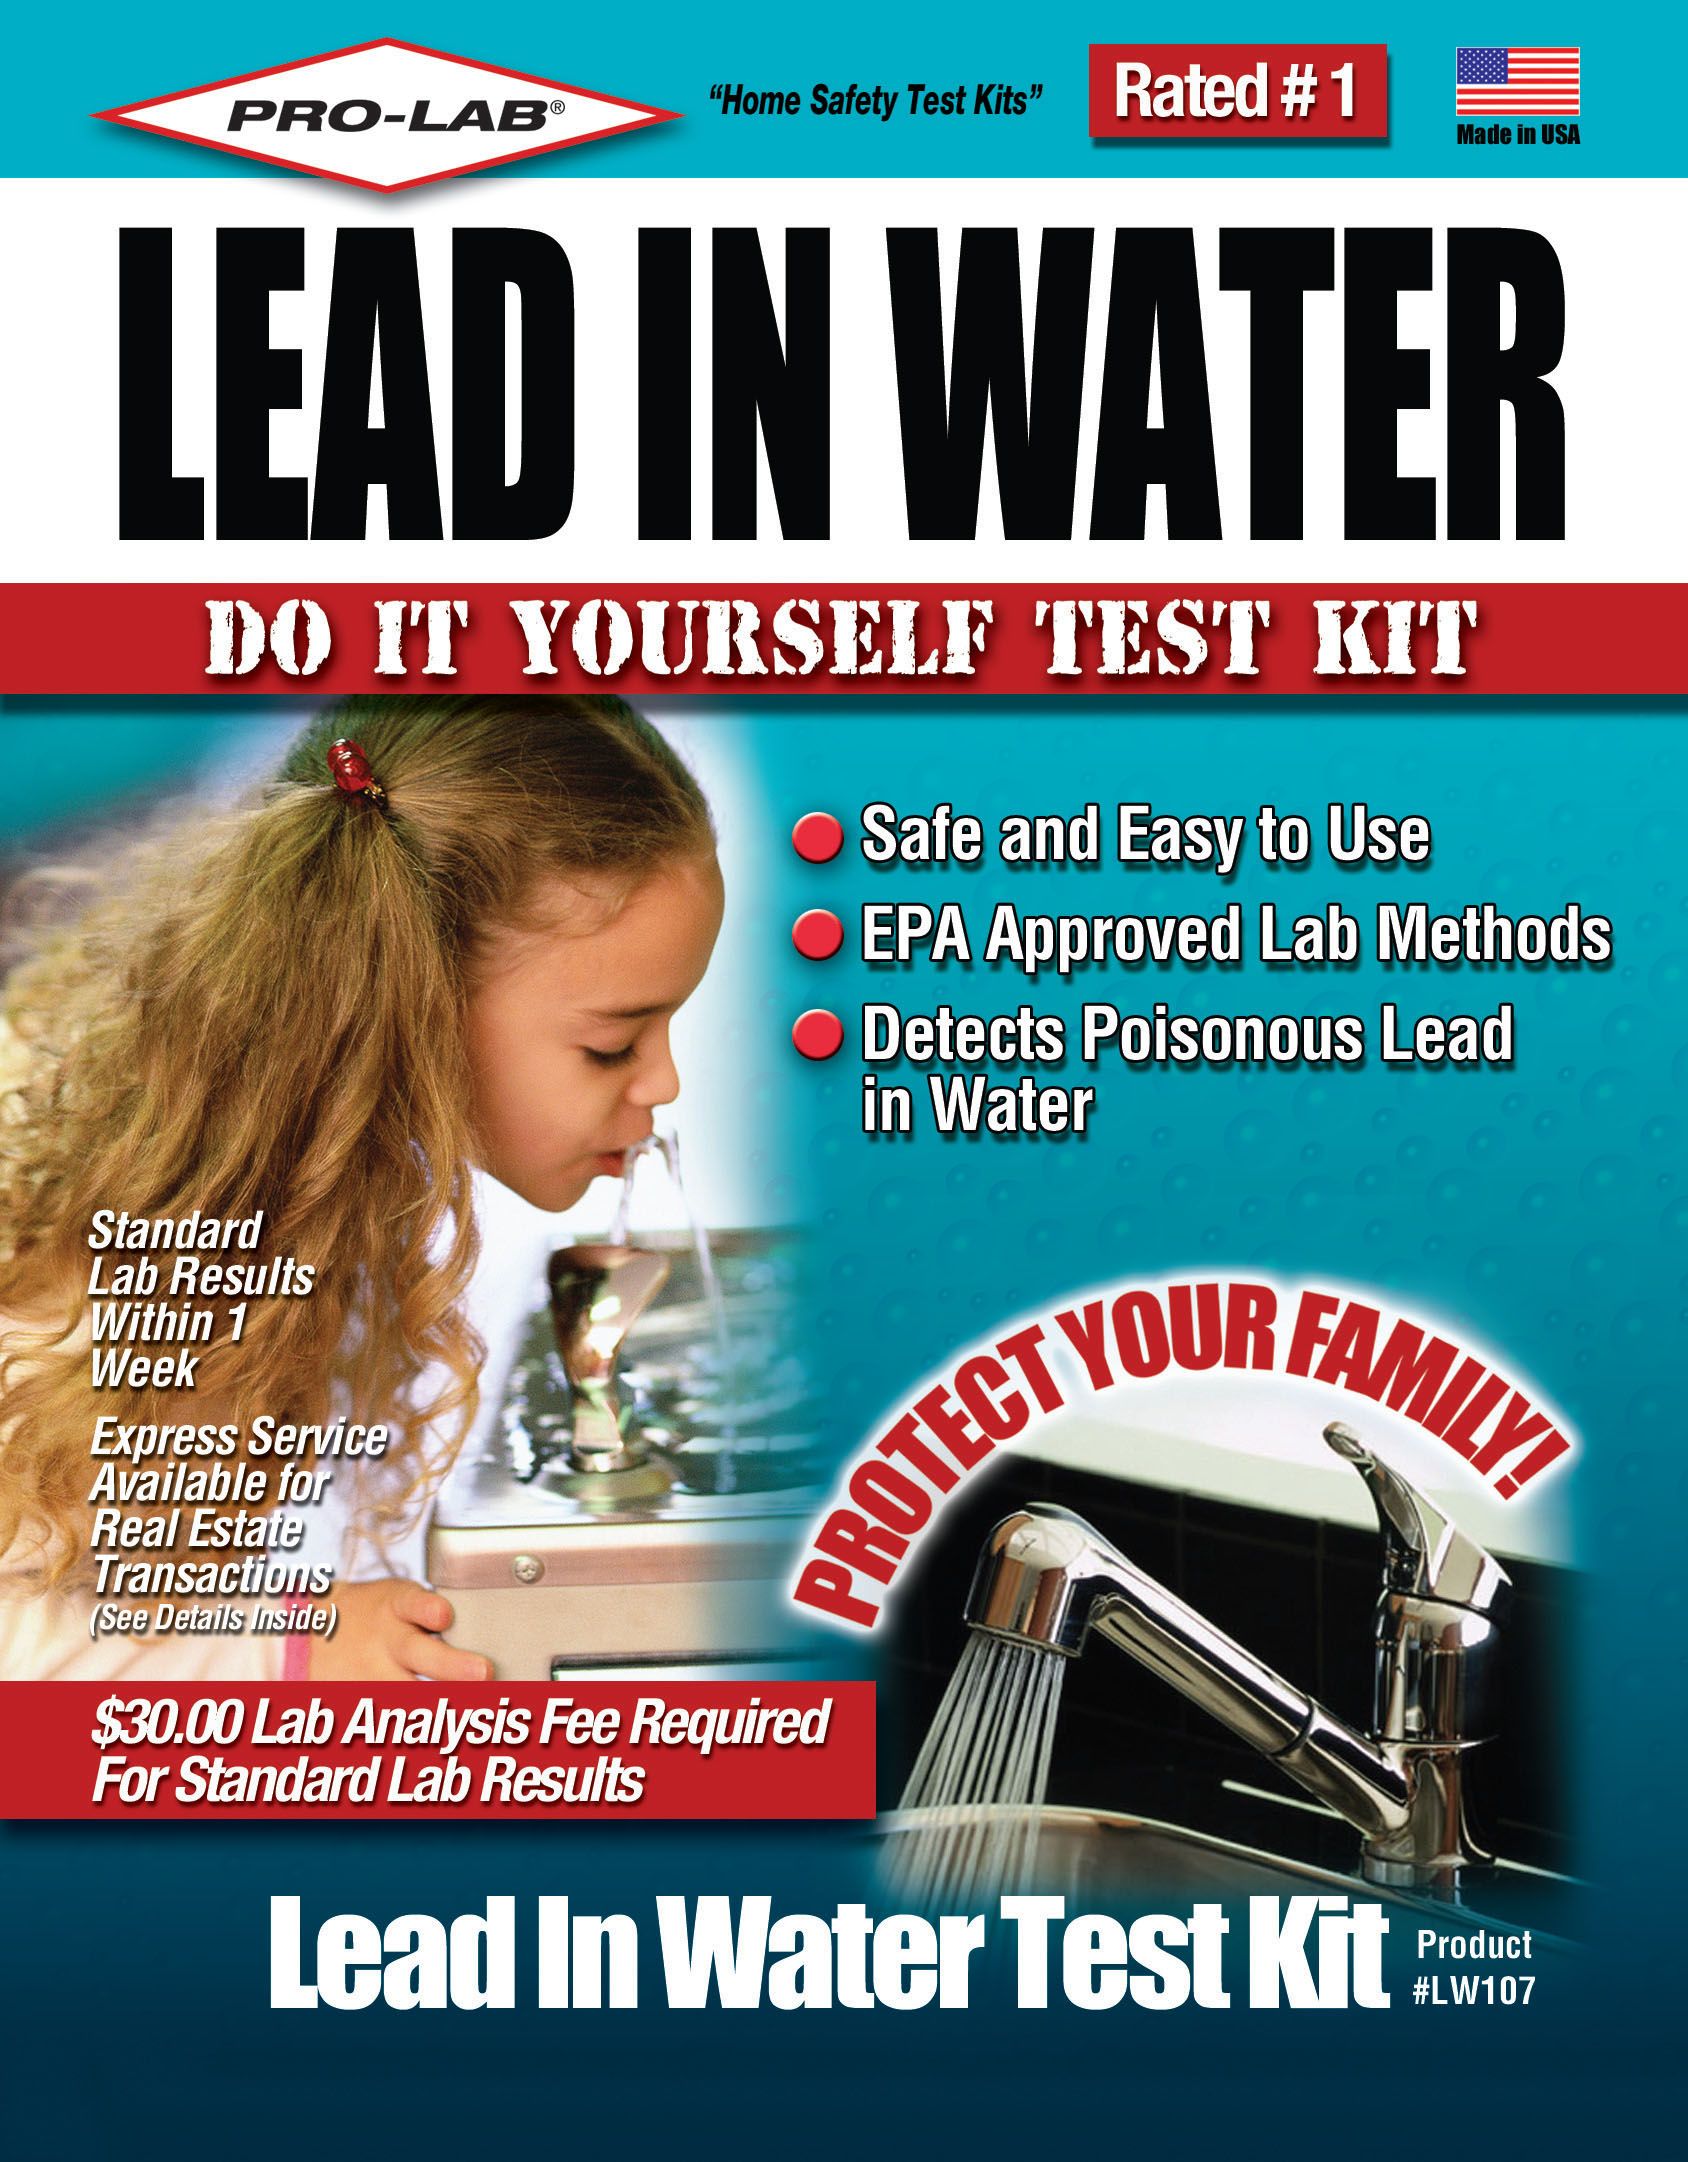 Professional Lead in Water Test Kit